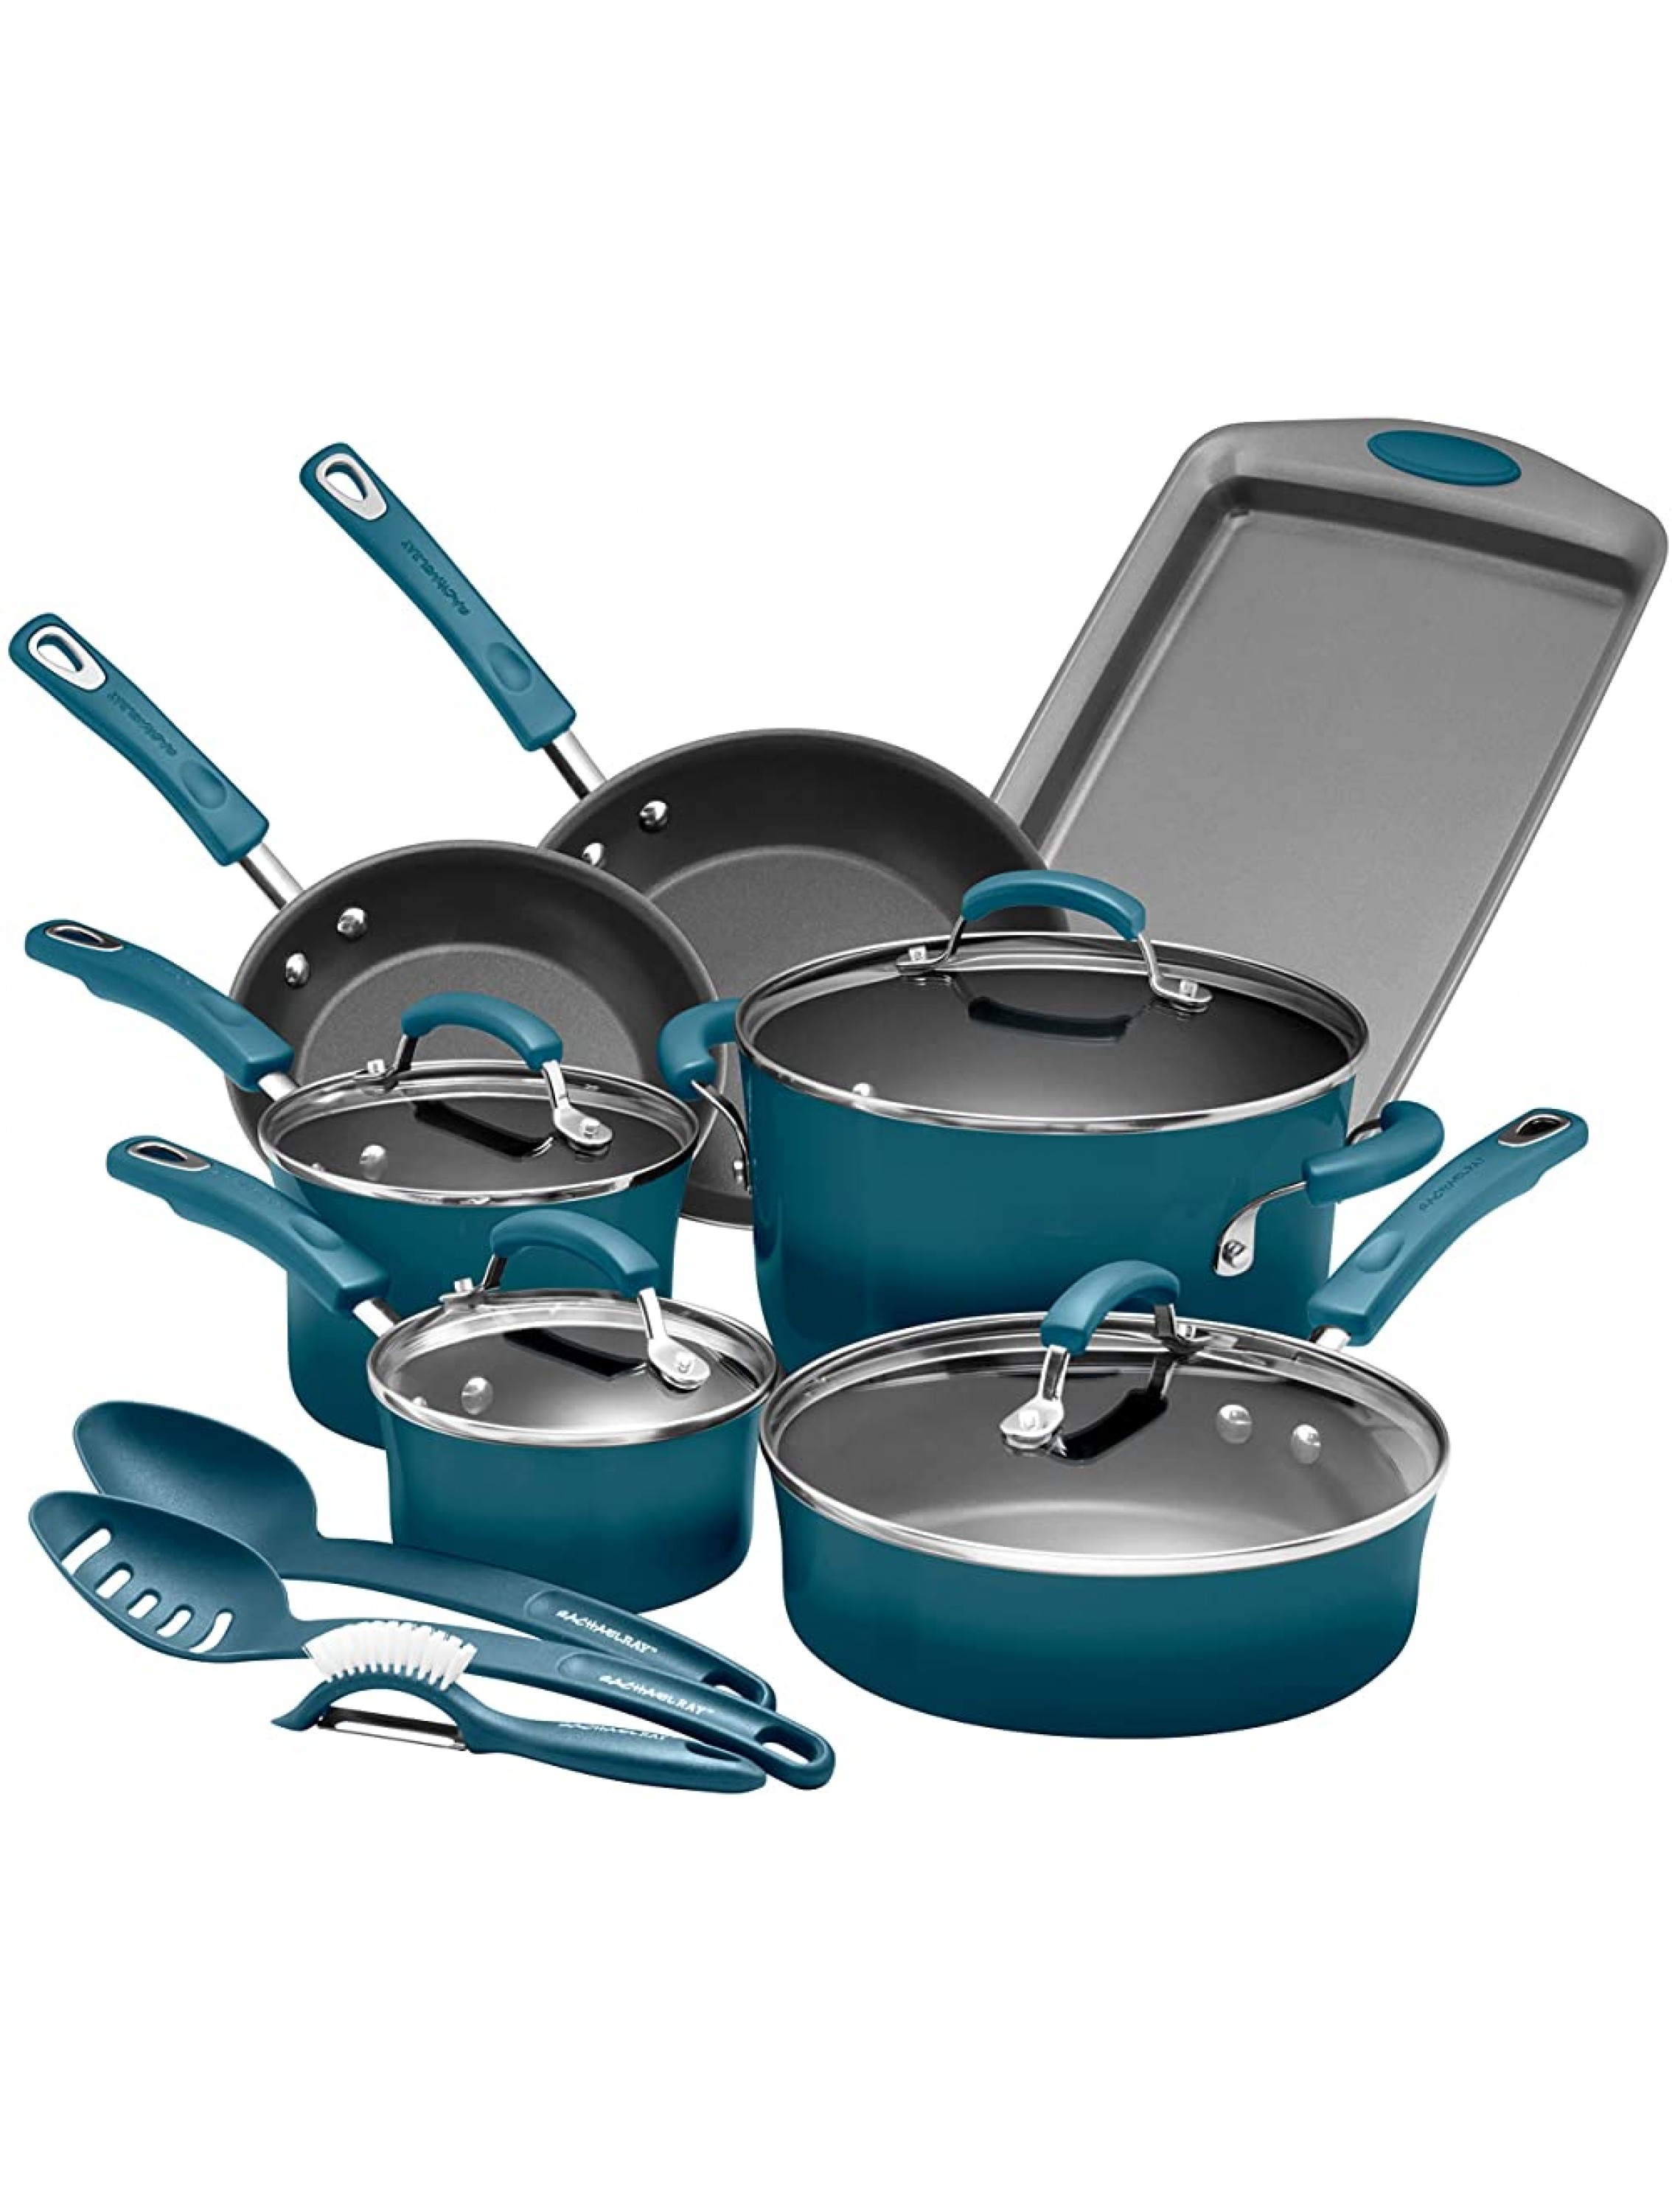 Rachael Ray Brights Nonstick Cookware Pots and Pans Set 14 Piece Marine Blue Gradient - BYJ7RGNPE